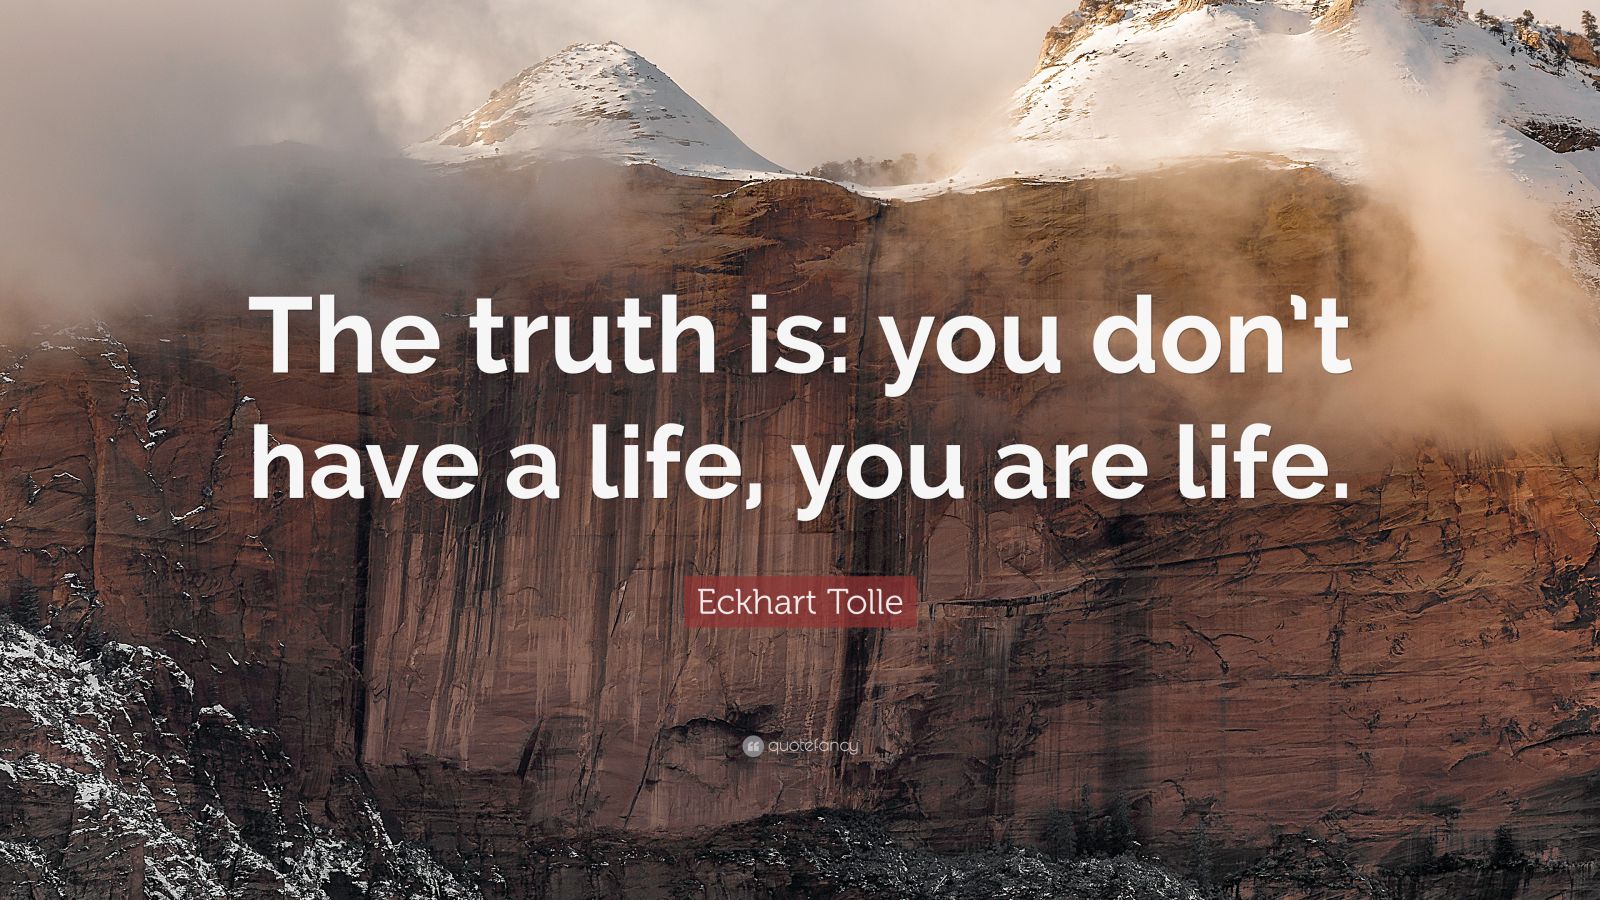 Eckhart Tolle Quote: “The truth is: you don’t have a life, you are life